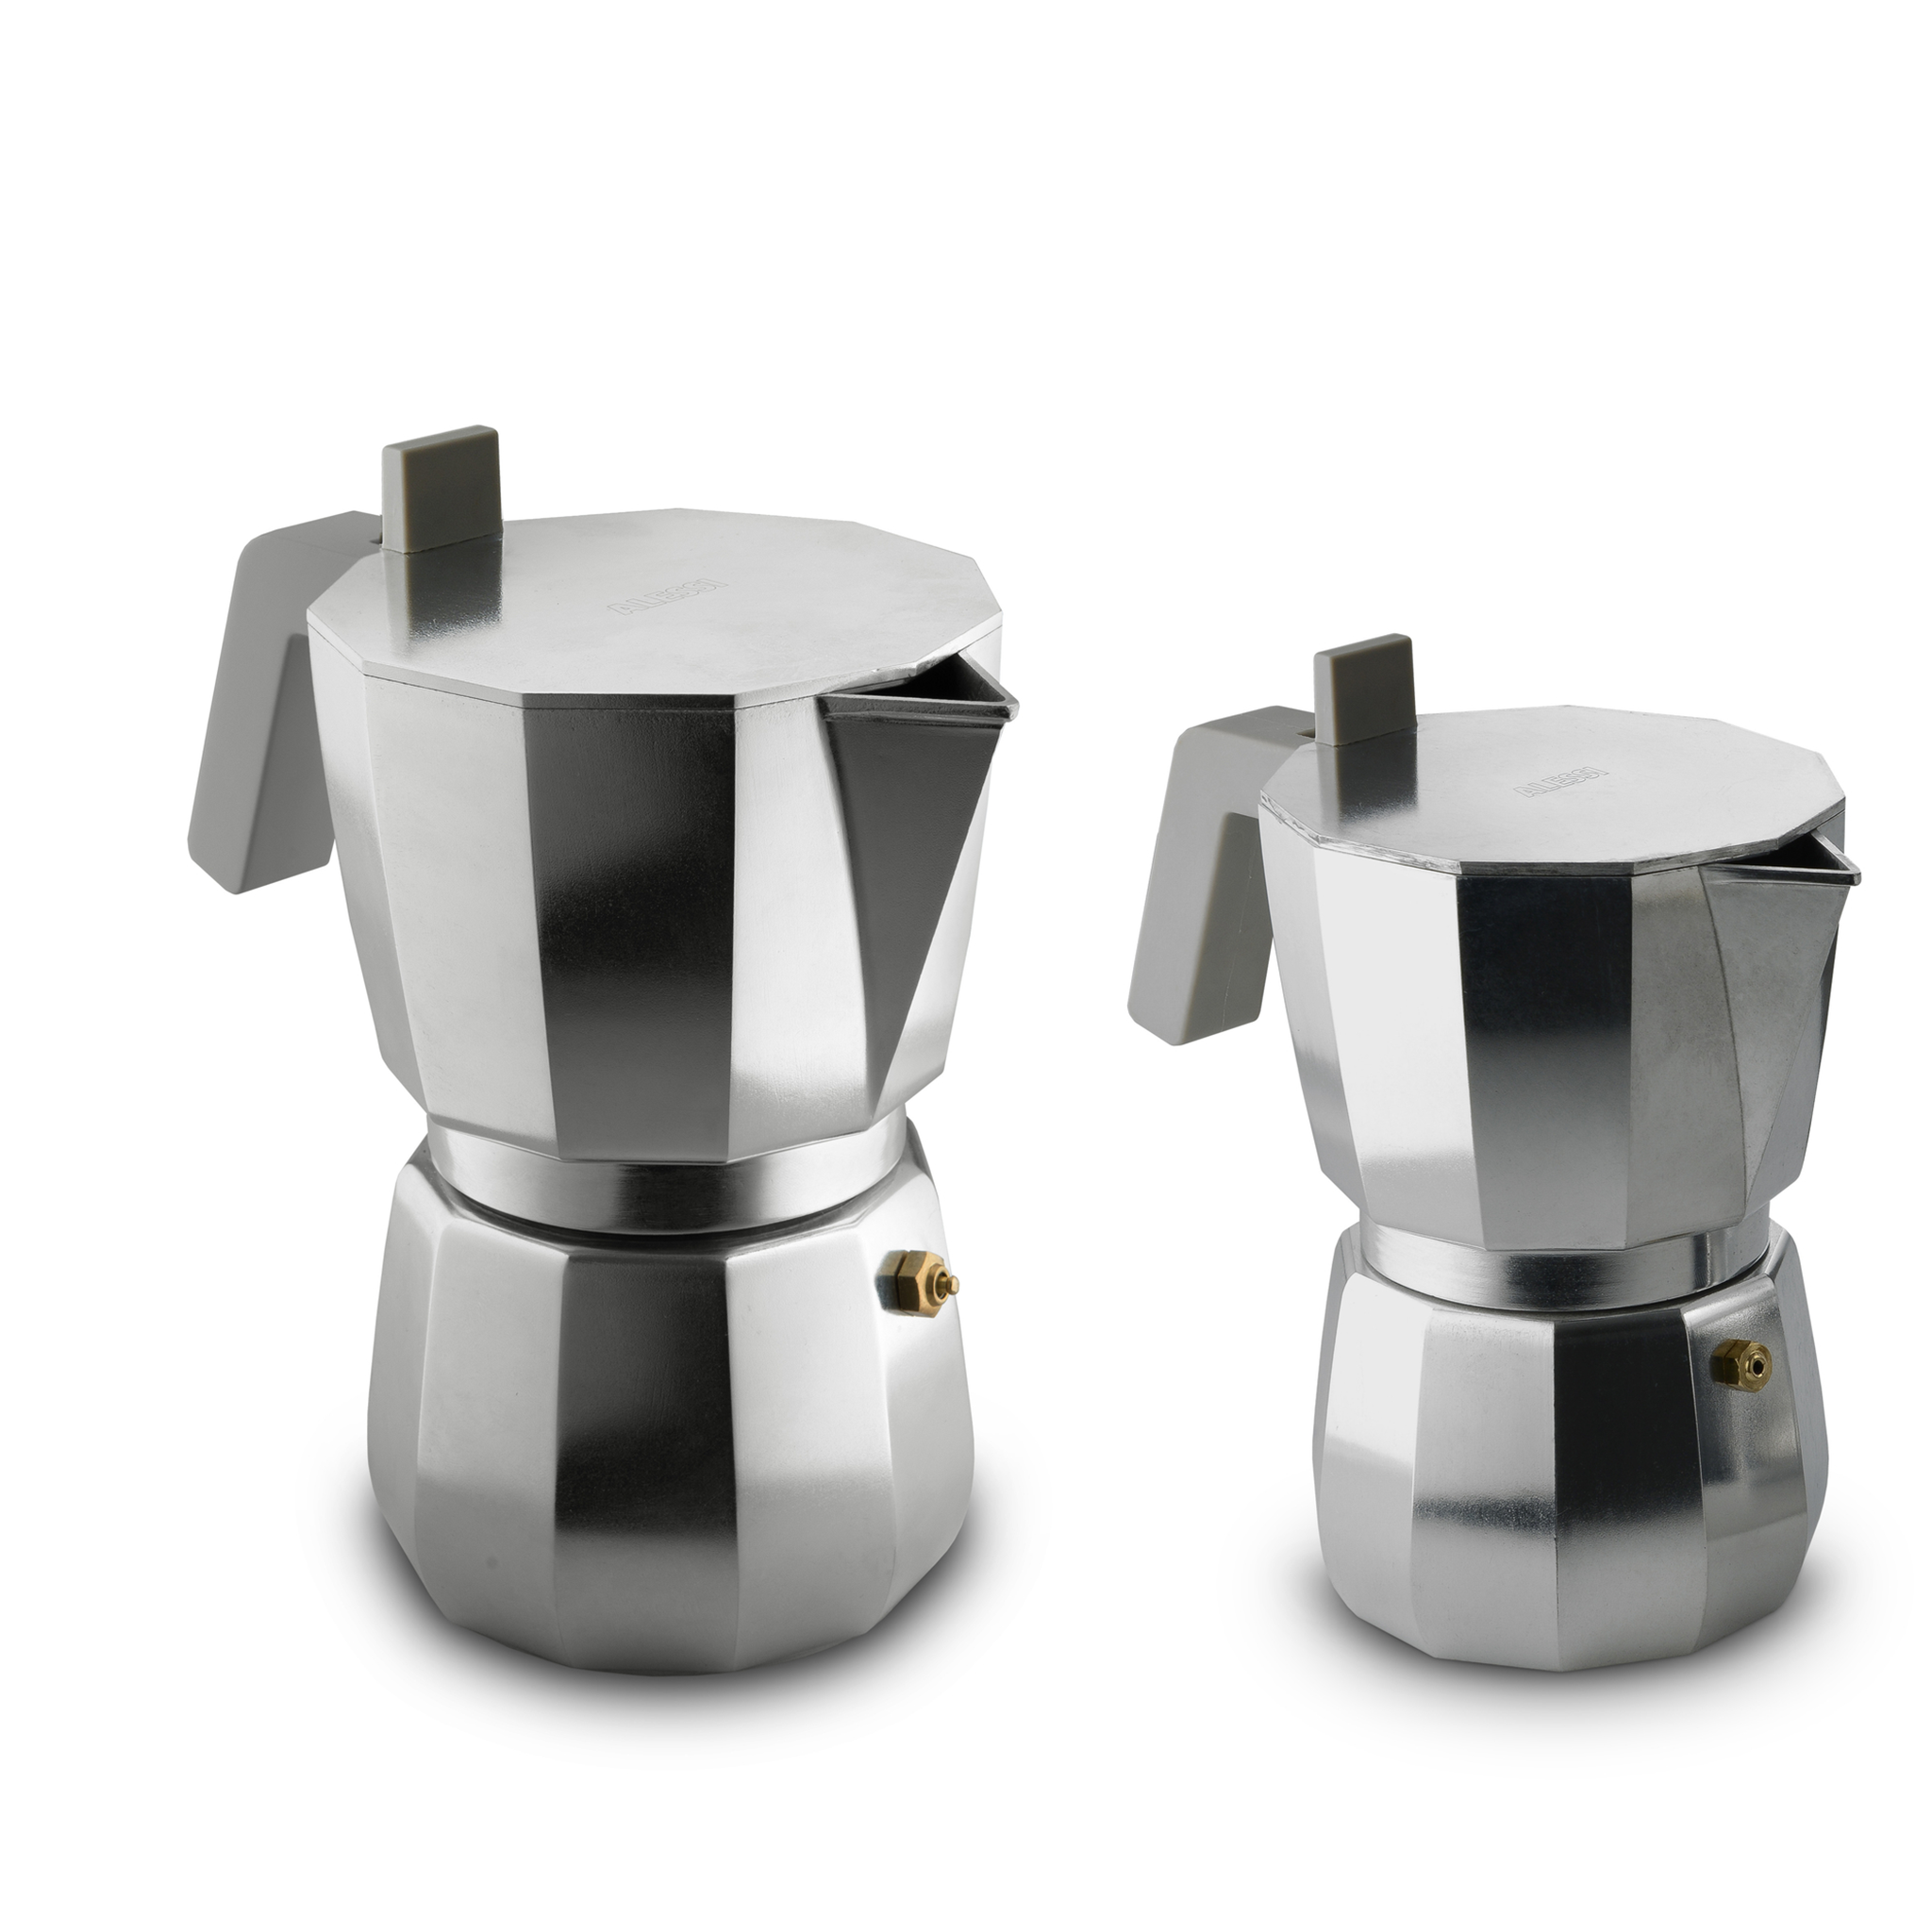 Moka Espresso Coffee Maker by David Chipperfield for Alessi - 6 Cup  Amusespot - Unique products by Alessi for Kitchen, Home Décor, Barware,  Living, and Spa prod…